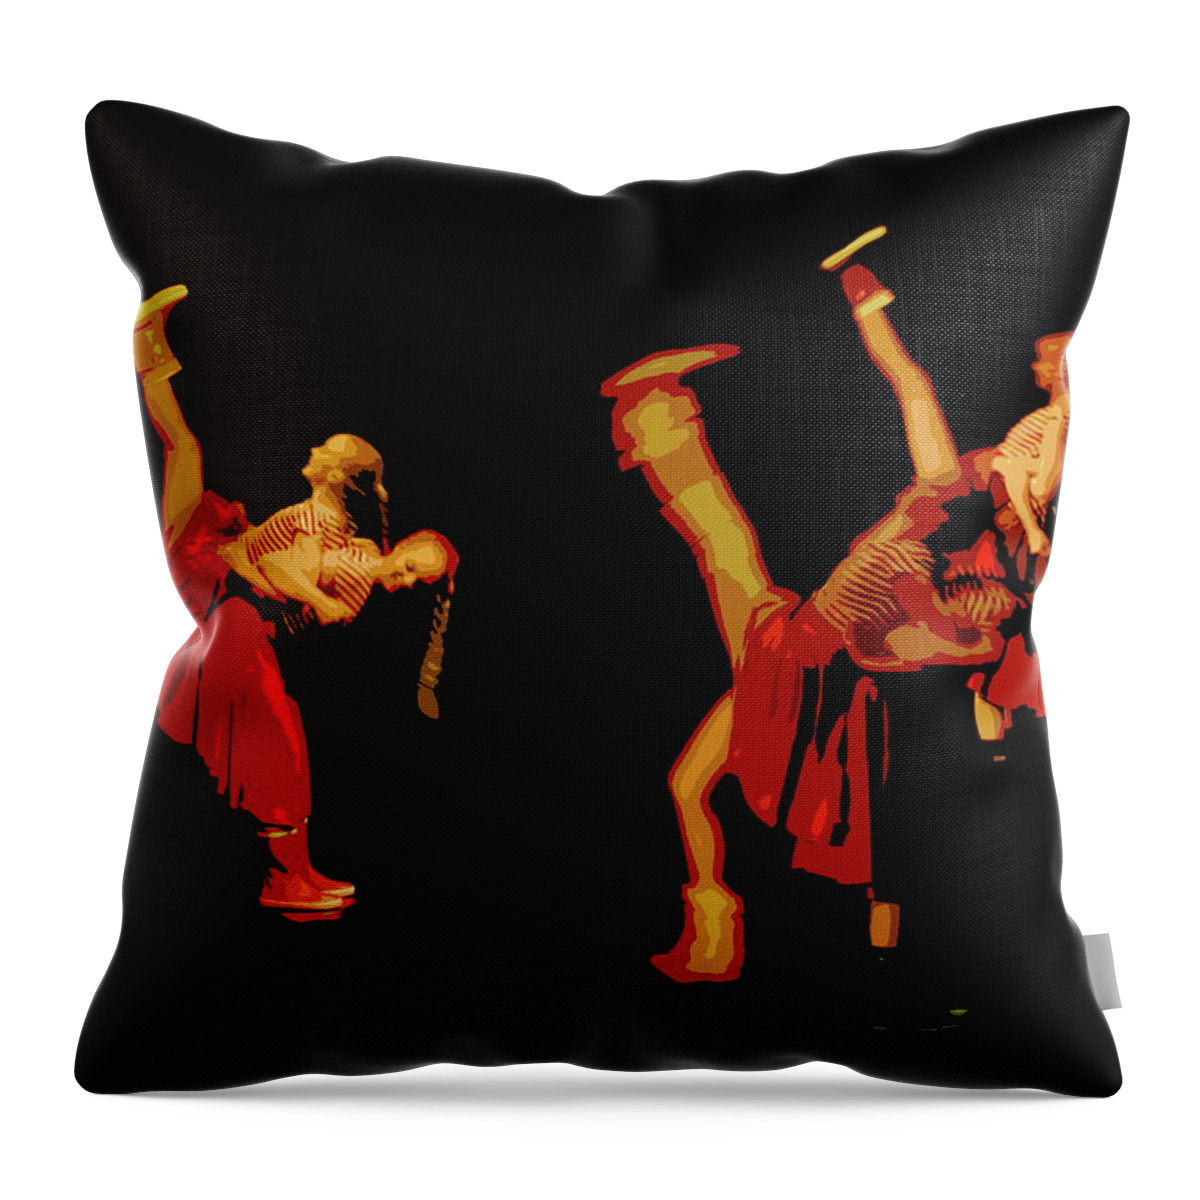 Finland Throw Pillow featuring the photograph Dancers #3 by Jouko Lehto